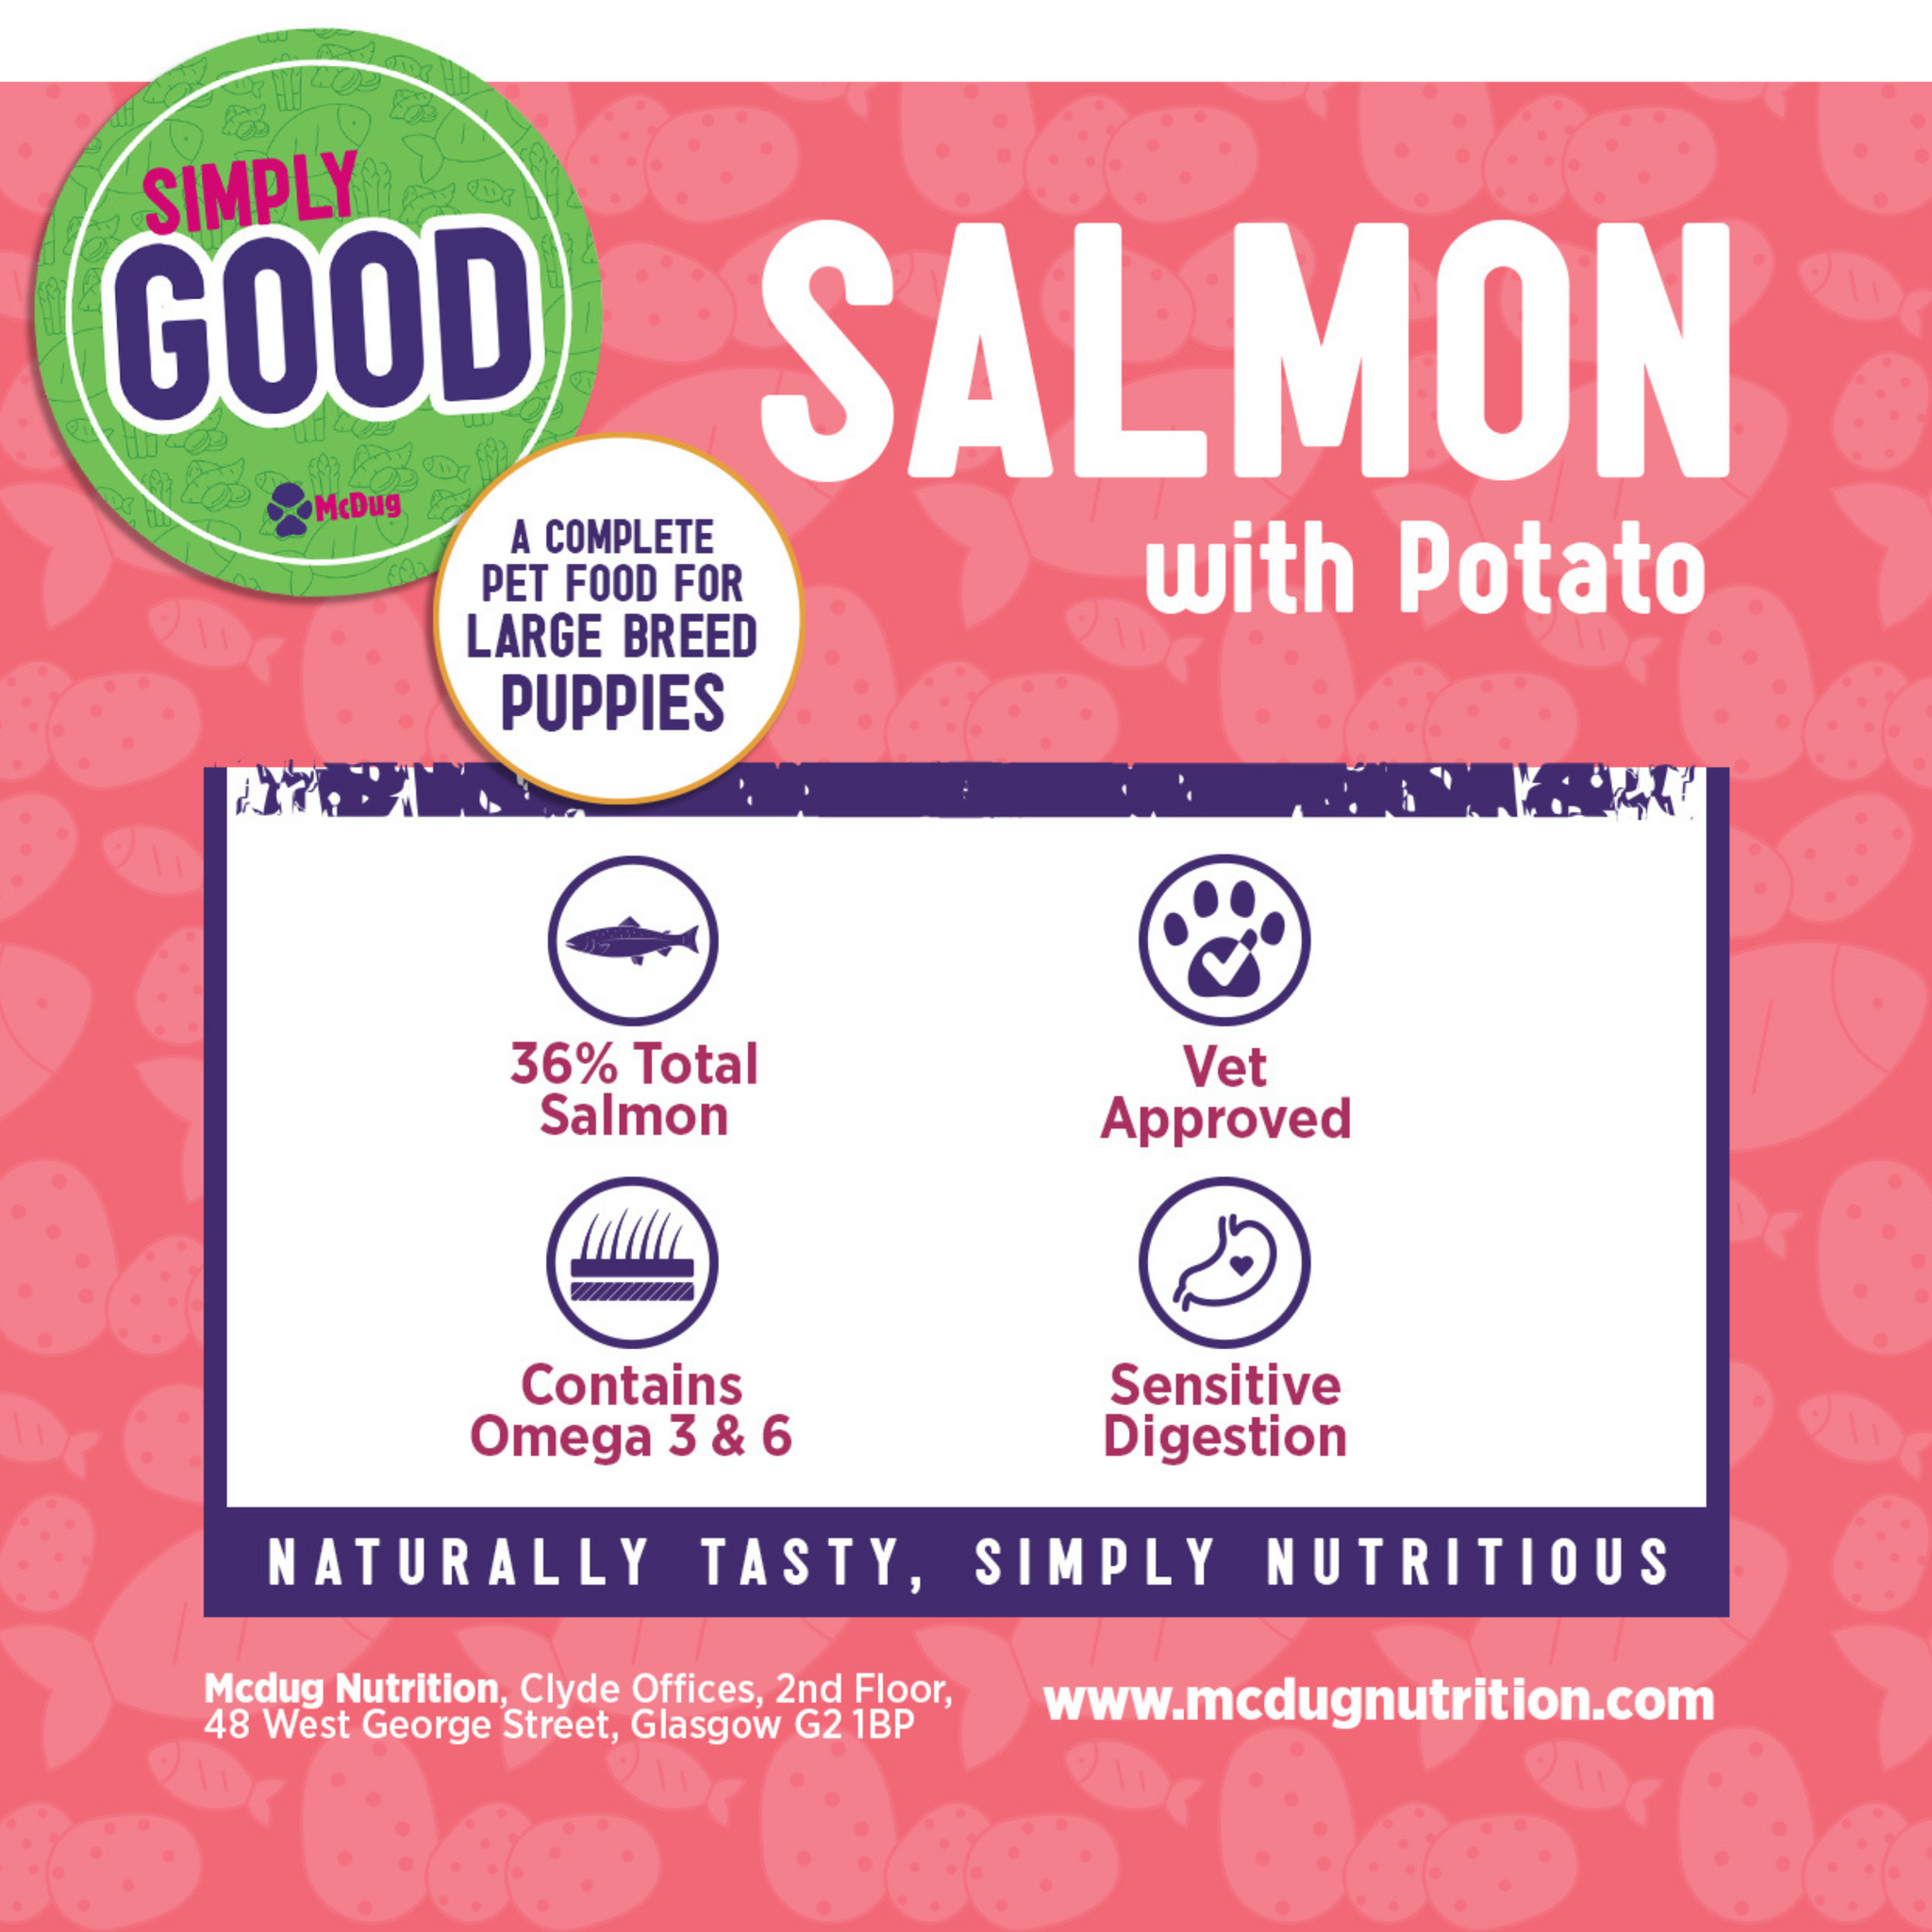 Simply Good Salmon and Potato (Puppy - Large Breed)